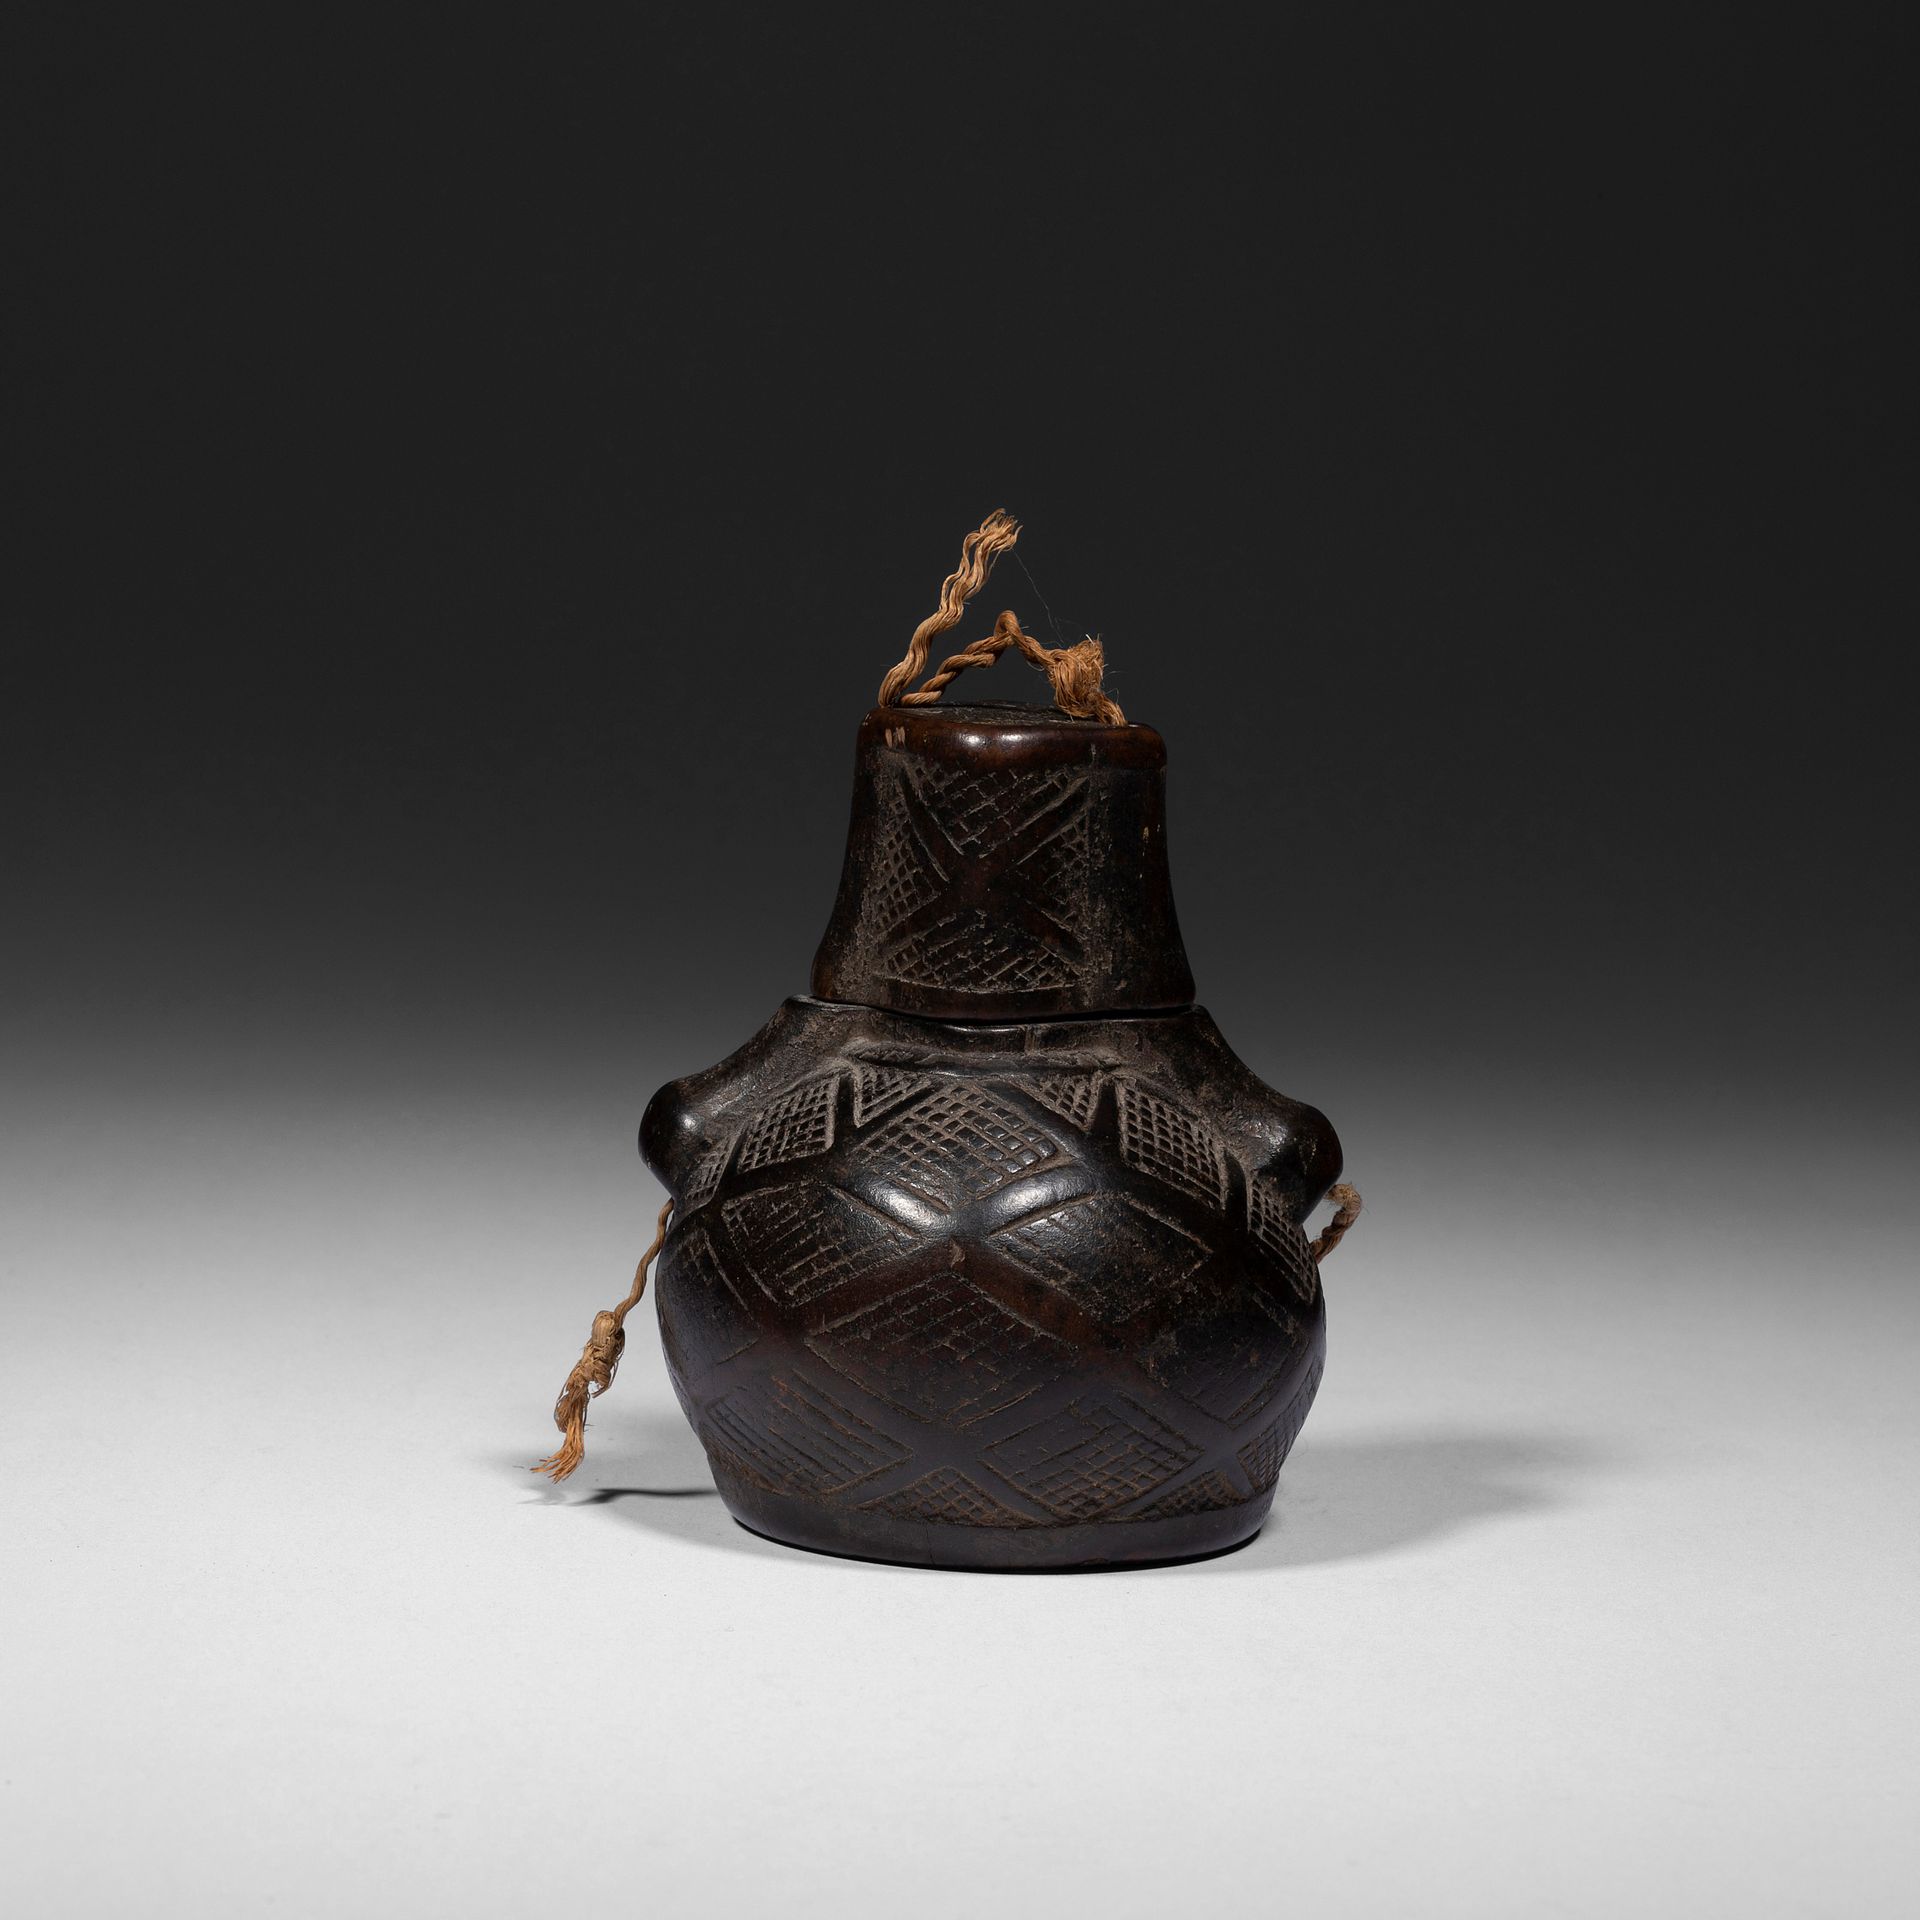 Null An old classic powder flask with engraved patterns.

Bakongo, Democratic Re&hellip;